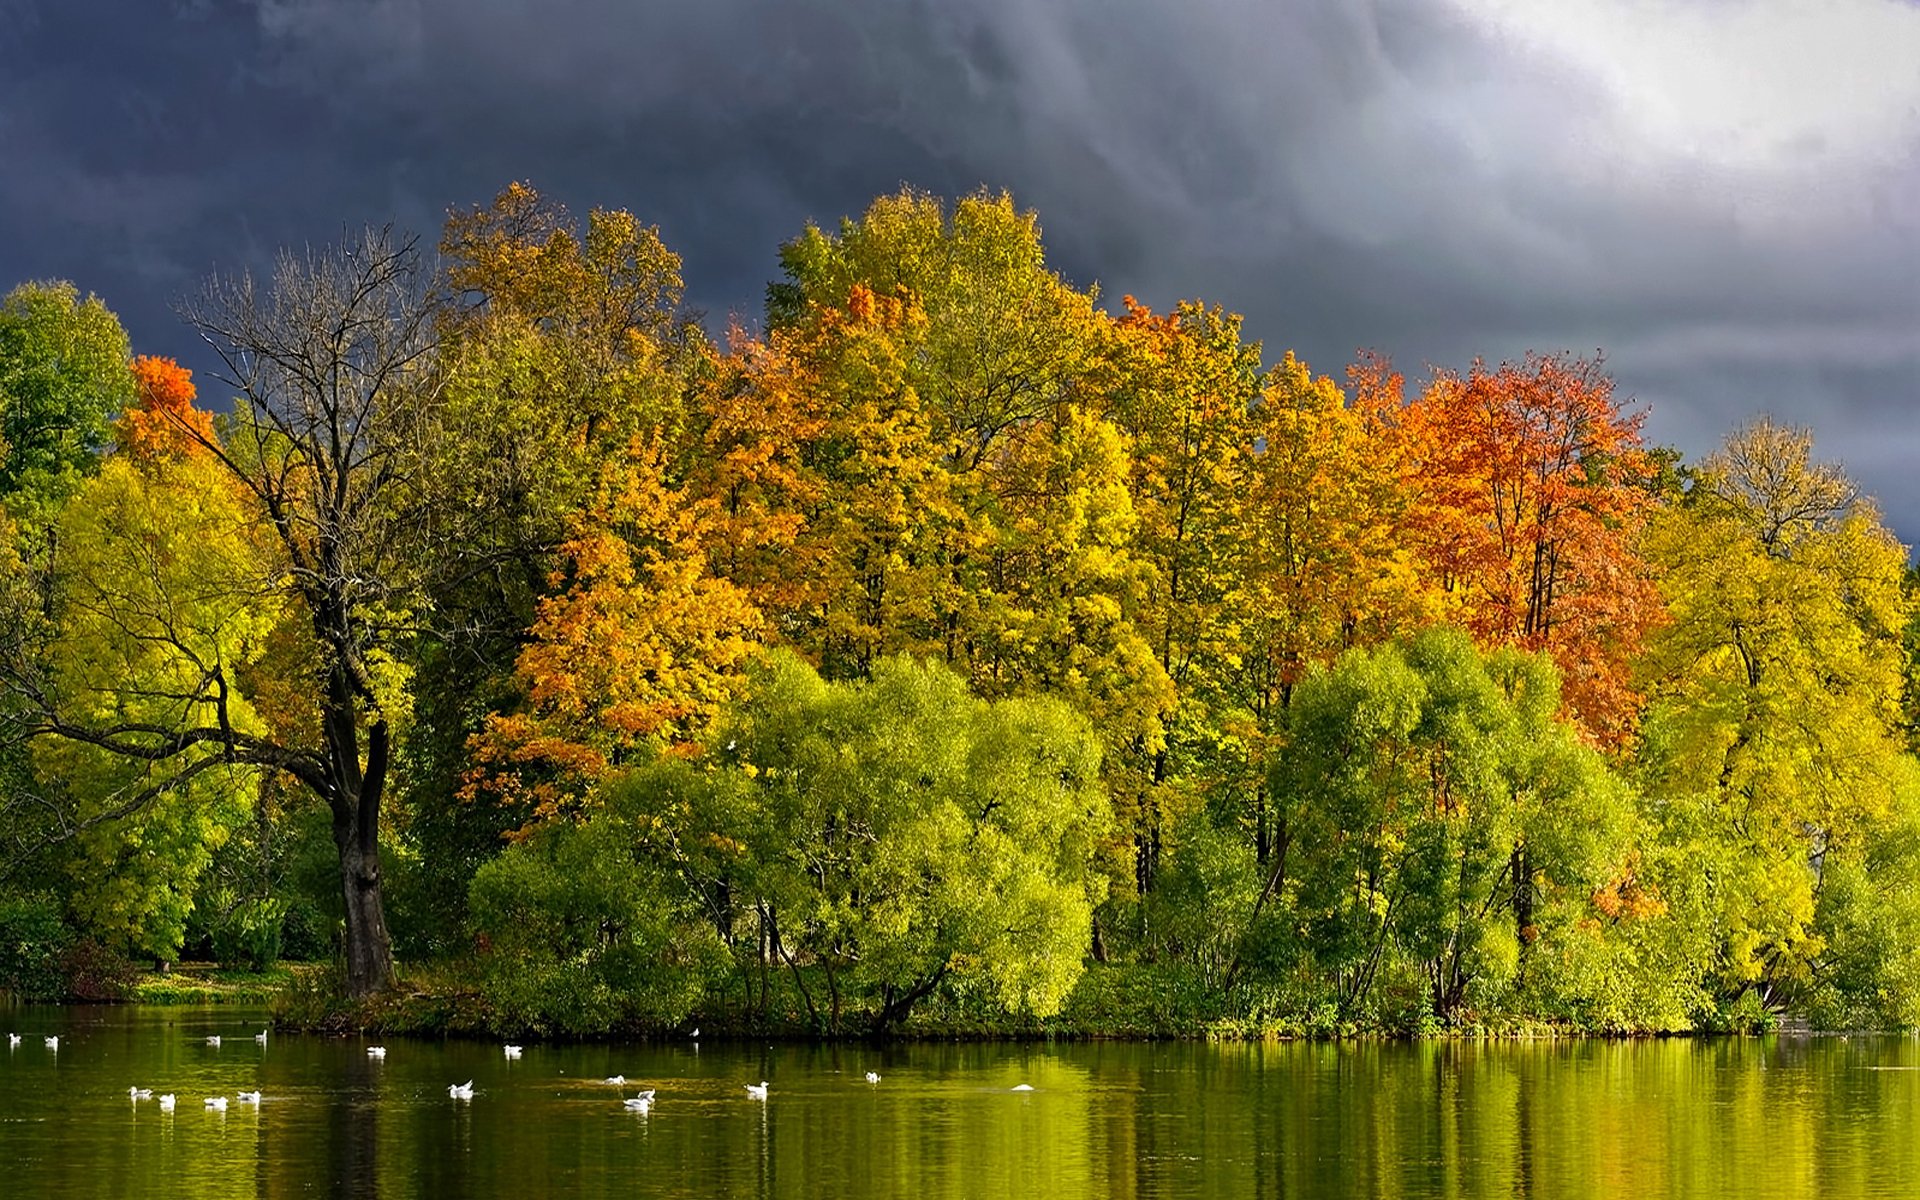 view, Lake, Grass, Leaves, Autumn, Splendor, Beautiful, Water, Trees, Peaceful, Splendor, Beauty, Clouds, Landscape, Autumn, Colors, Nature, Tree, Green, Forest, Birds, Storm, Sky, Woodland, Wood, Autumn, Leave Wallpaper